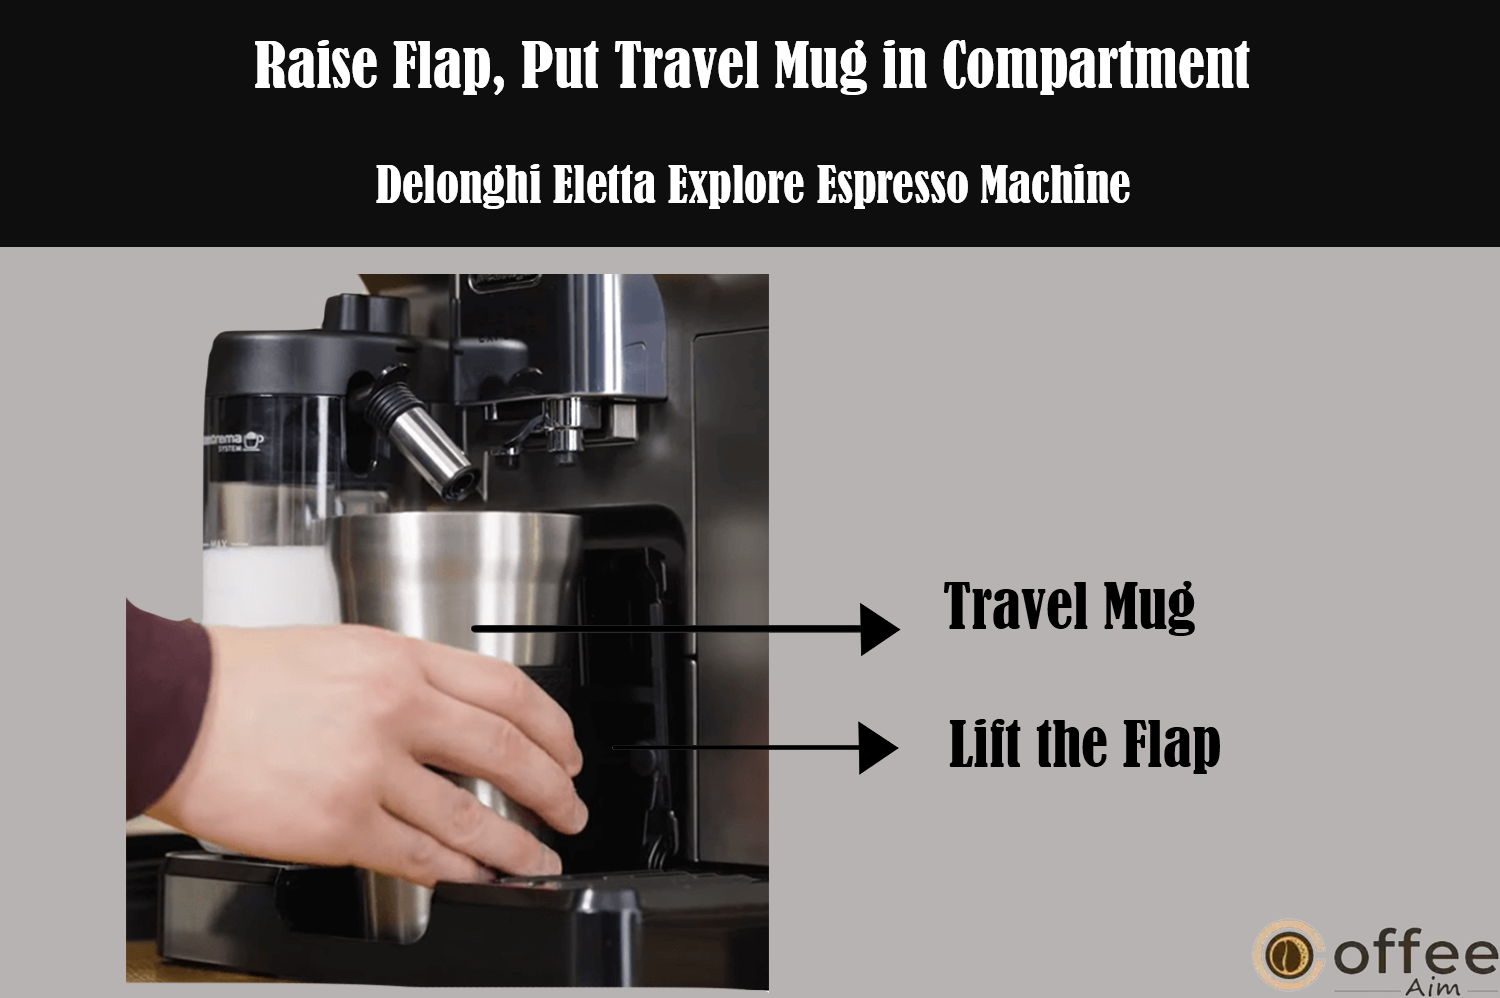 The image illustrates the process of lifting the flap and positioning the travel mug within the designated compartment of the "Delonghi Eletta Explore Espresso Machine," an important step detailed in the article "How to Use the Delonghi Eletta Explore Espresso Machine."